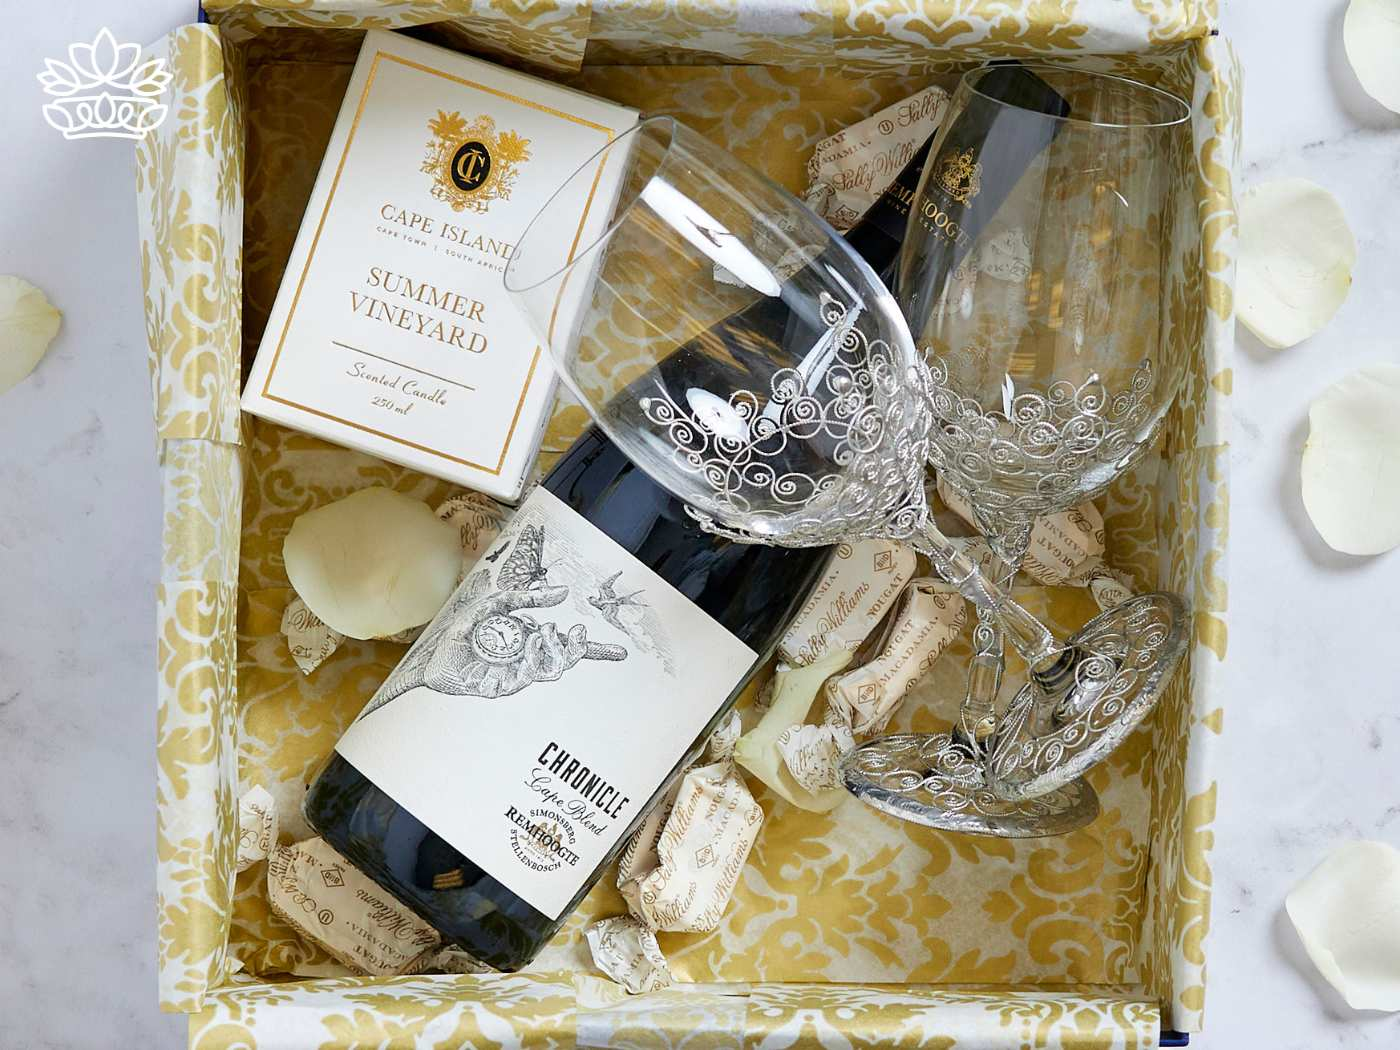 Luxury gift box containing a bottle of Chronicle red wine, two ornate wine glasses, and a Cape Island 'Summer Vineyard' scented candle, beautifully packaged with golden wrapping and rose petals. A refined selection from Fabulous Flowers and Gifts, perfect for special occasions at guest houses and hotels.